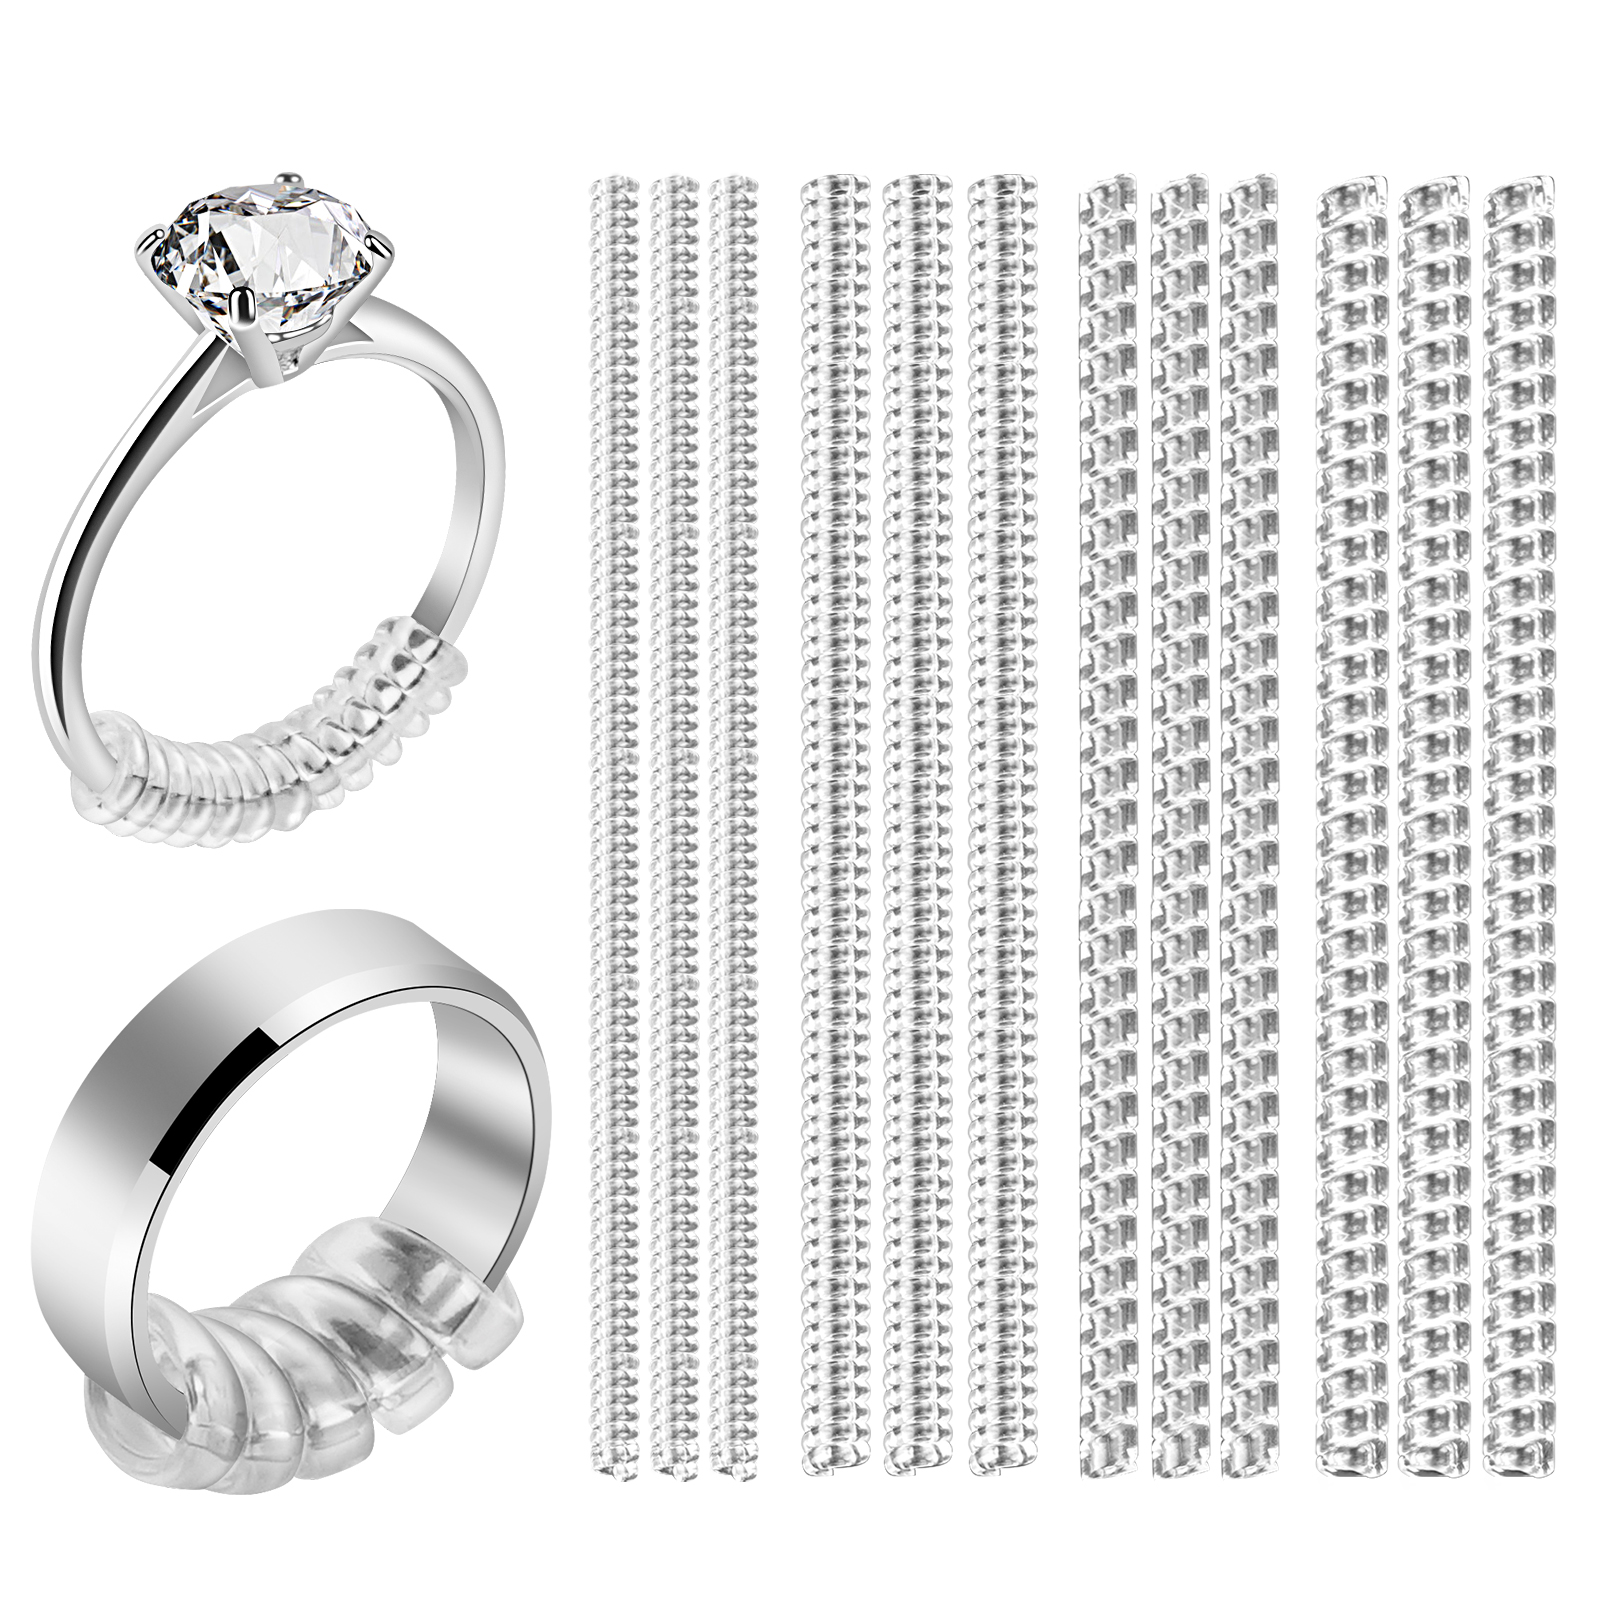 Abaodam 18 Sheets Ring Size Adjustment Ring Sizers for Loose Rings Men  Rings Ring Size Reducer Metal Ring Adjuster Mens Jewellery Loose Ring  Tightener